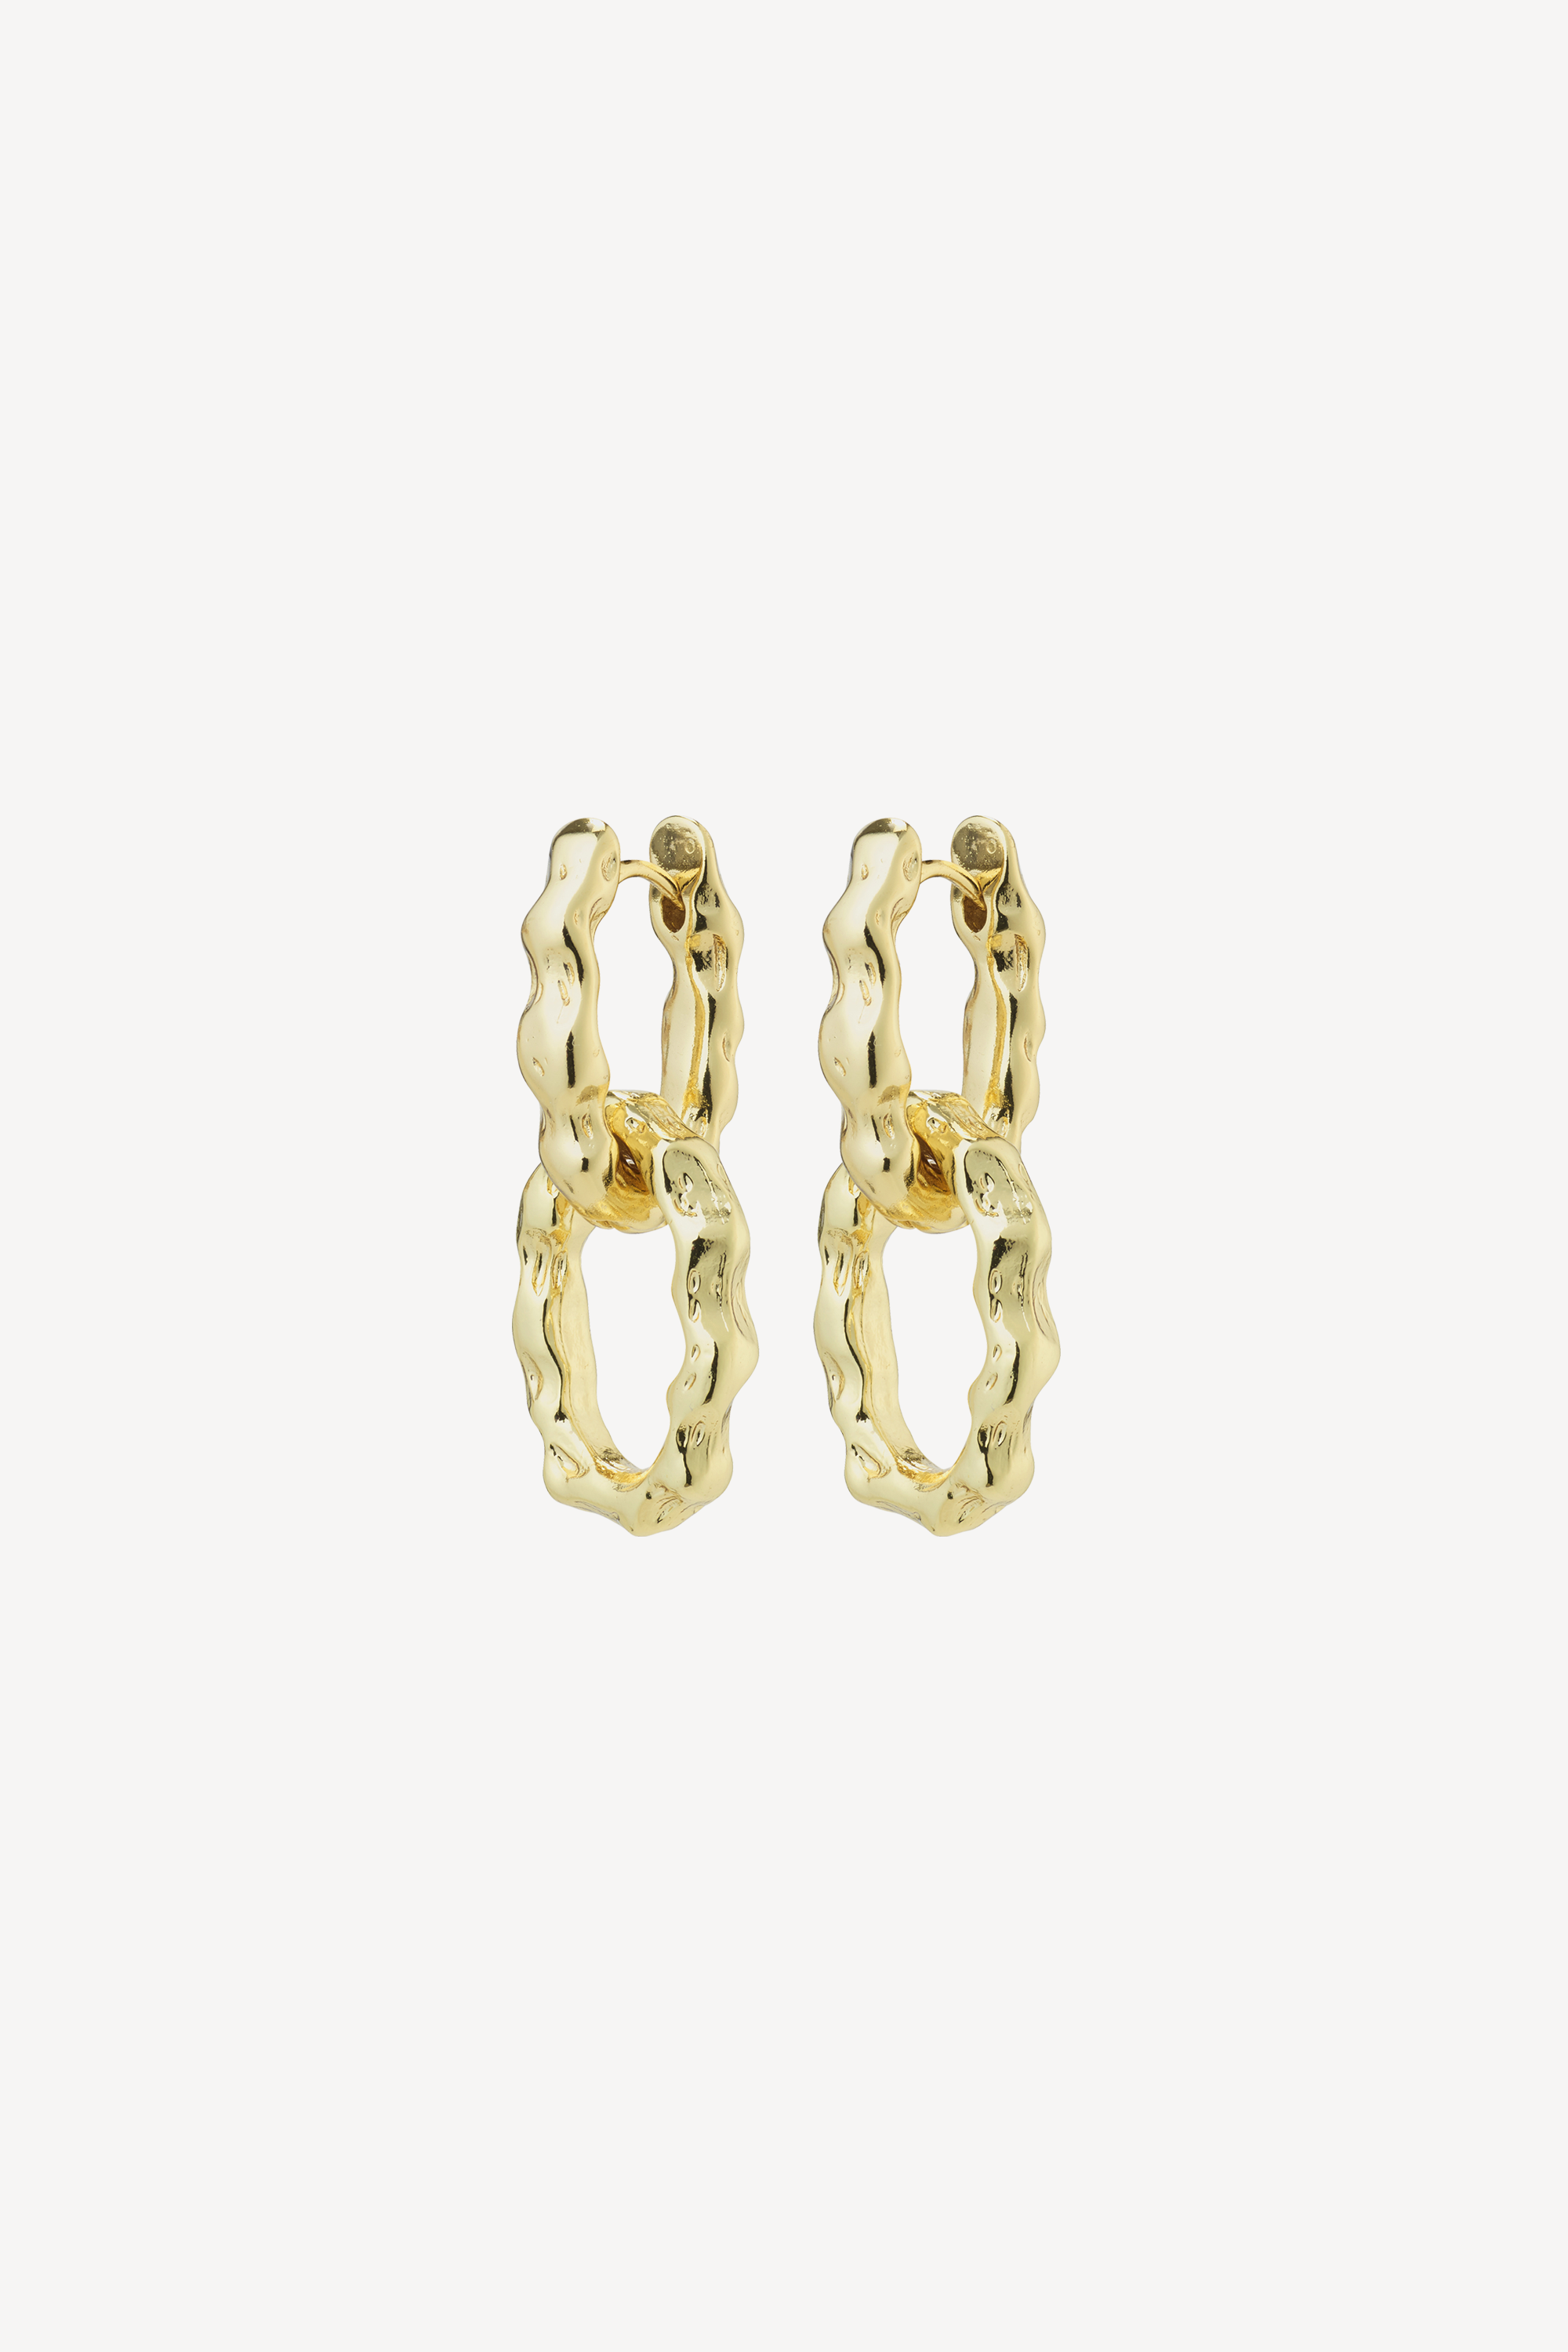 Reflect Earrings Gold (pair)